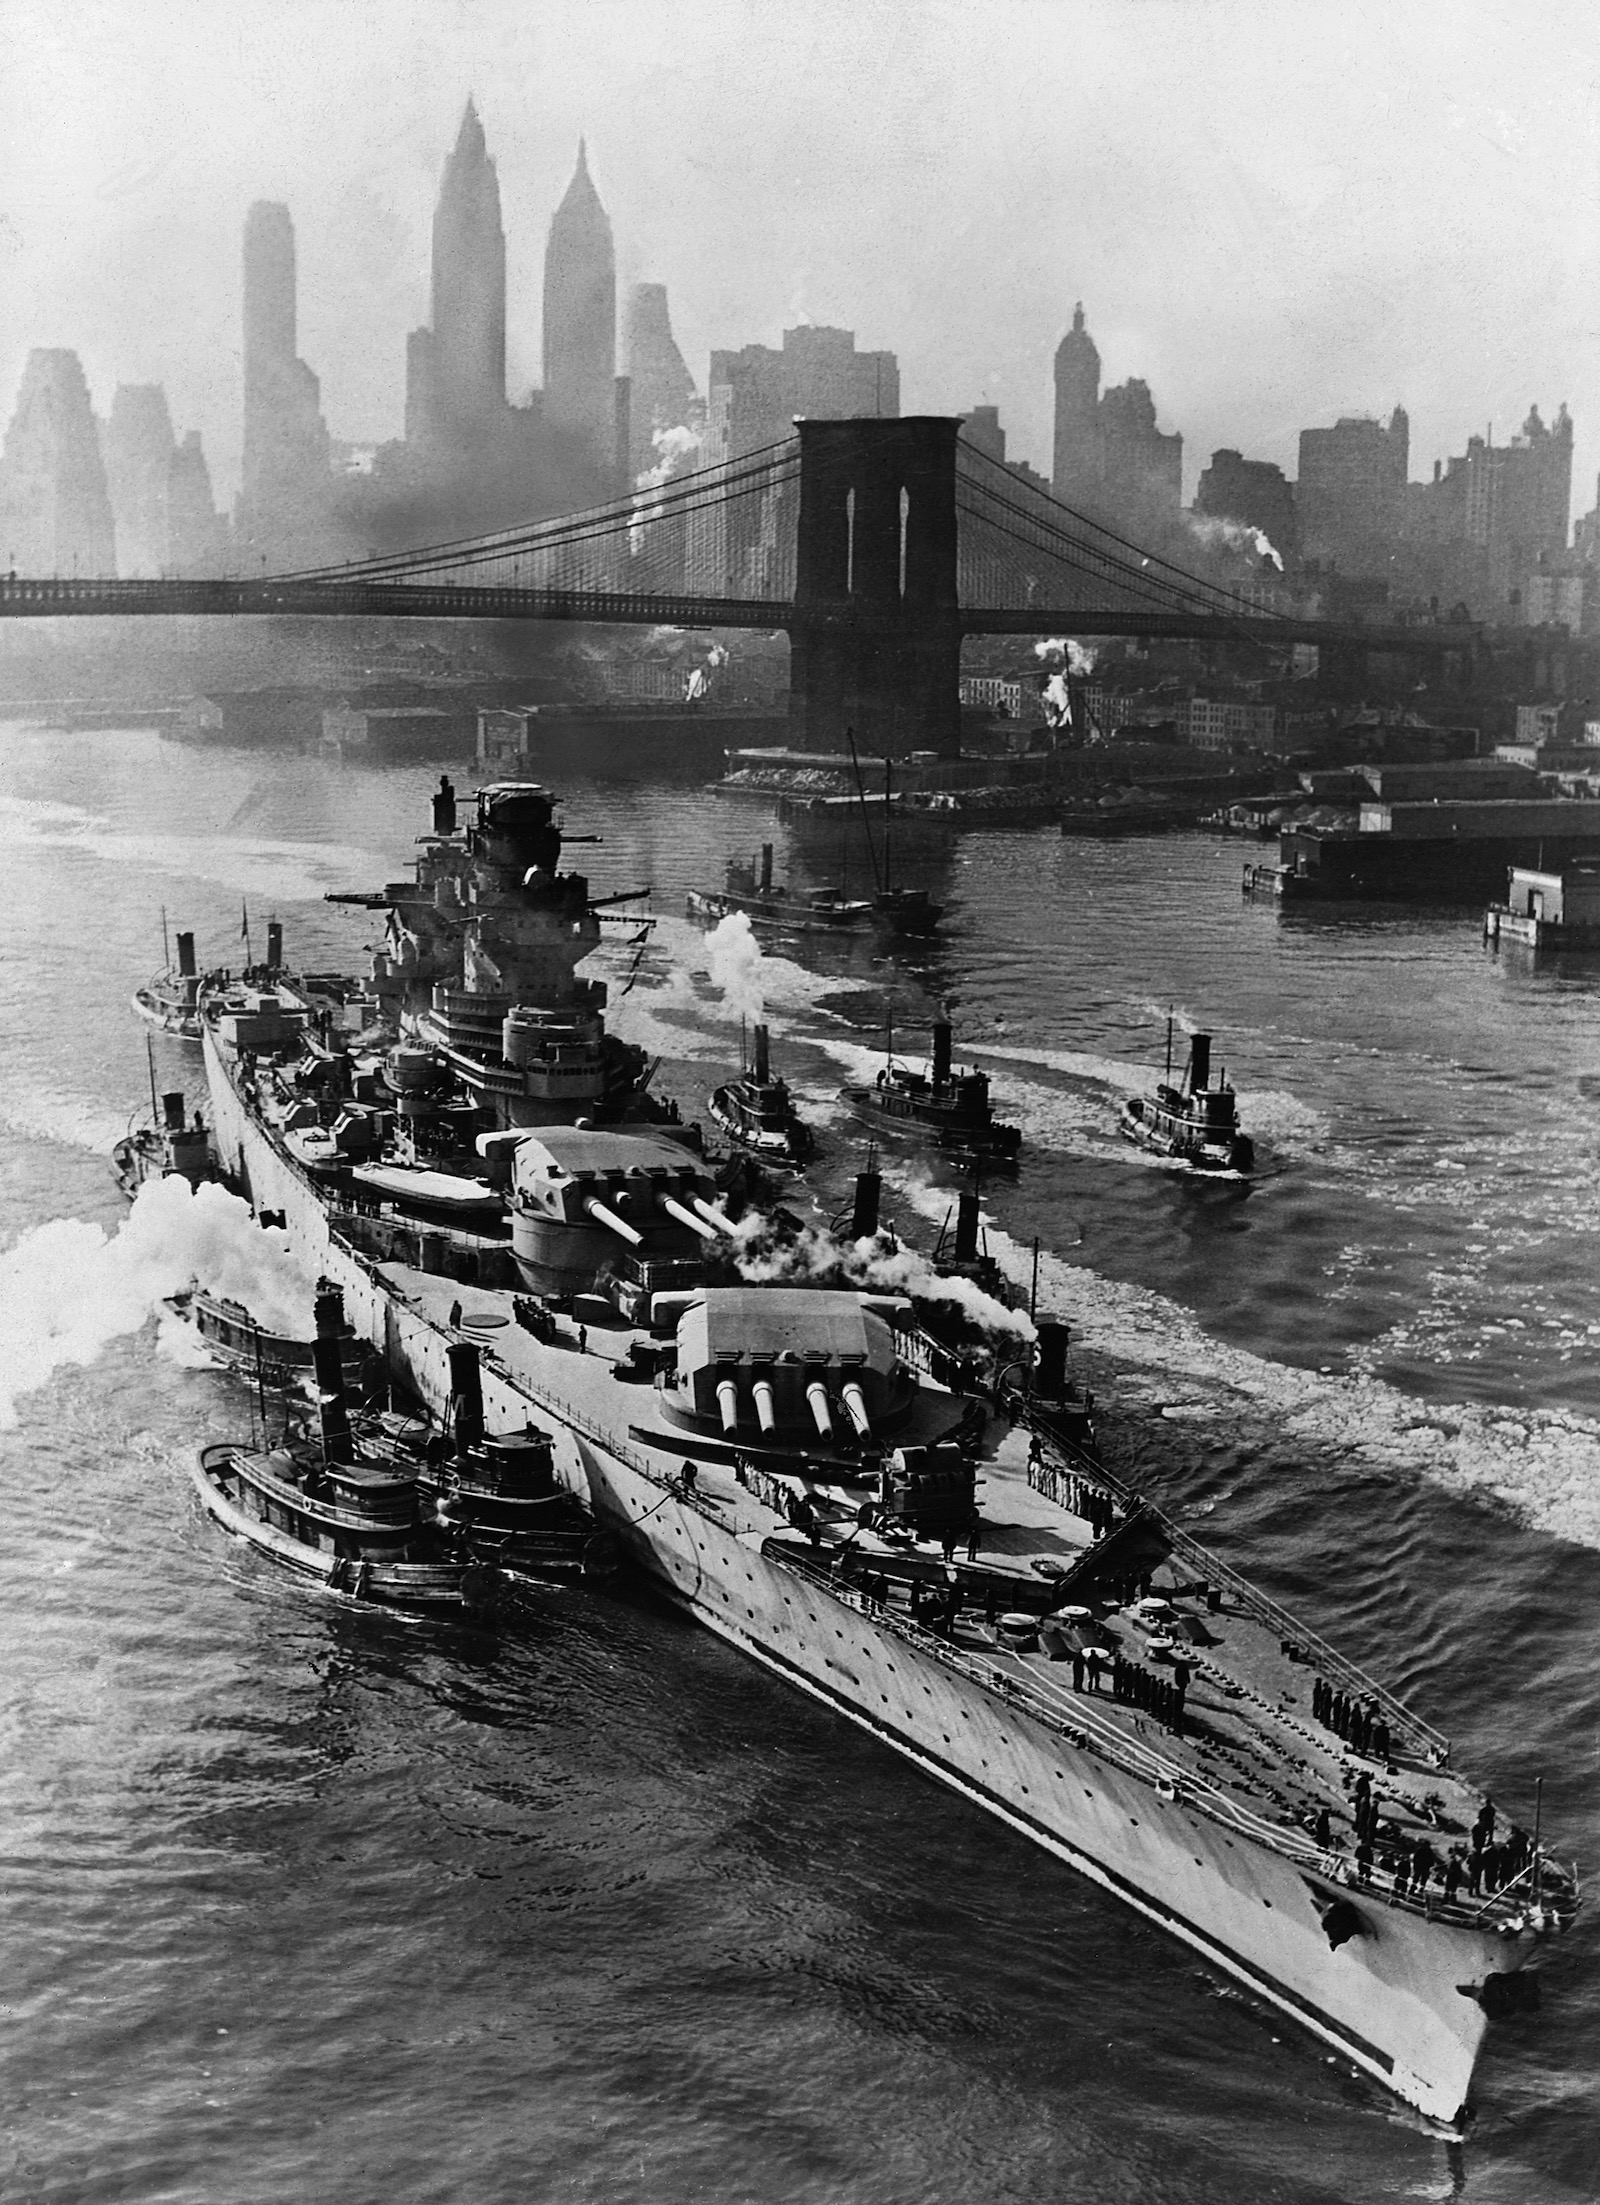 The French battleship Richelieu navigating the East River, 1943